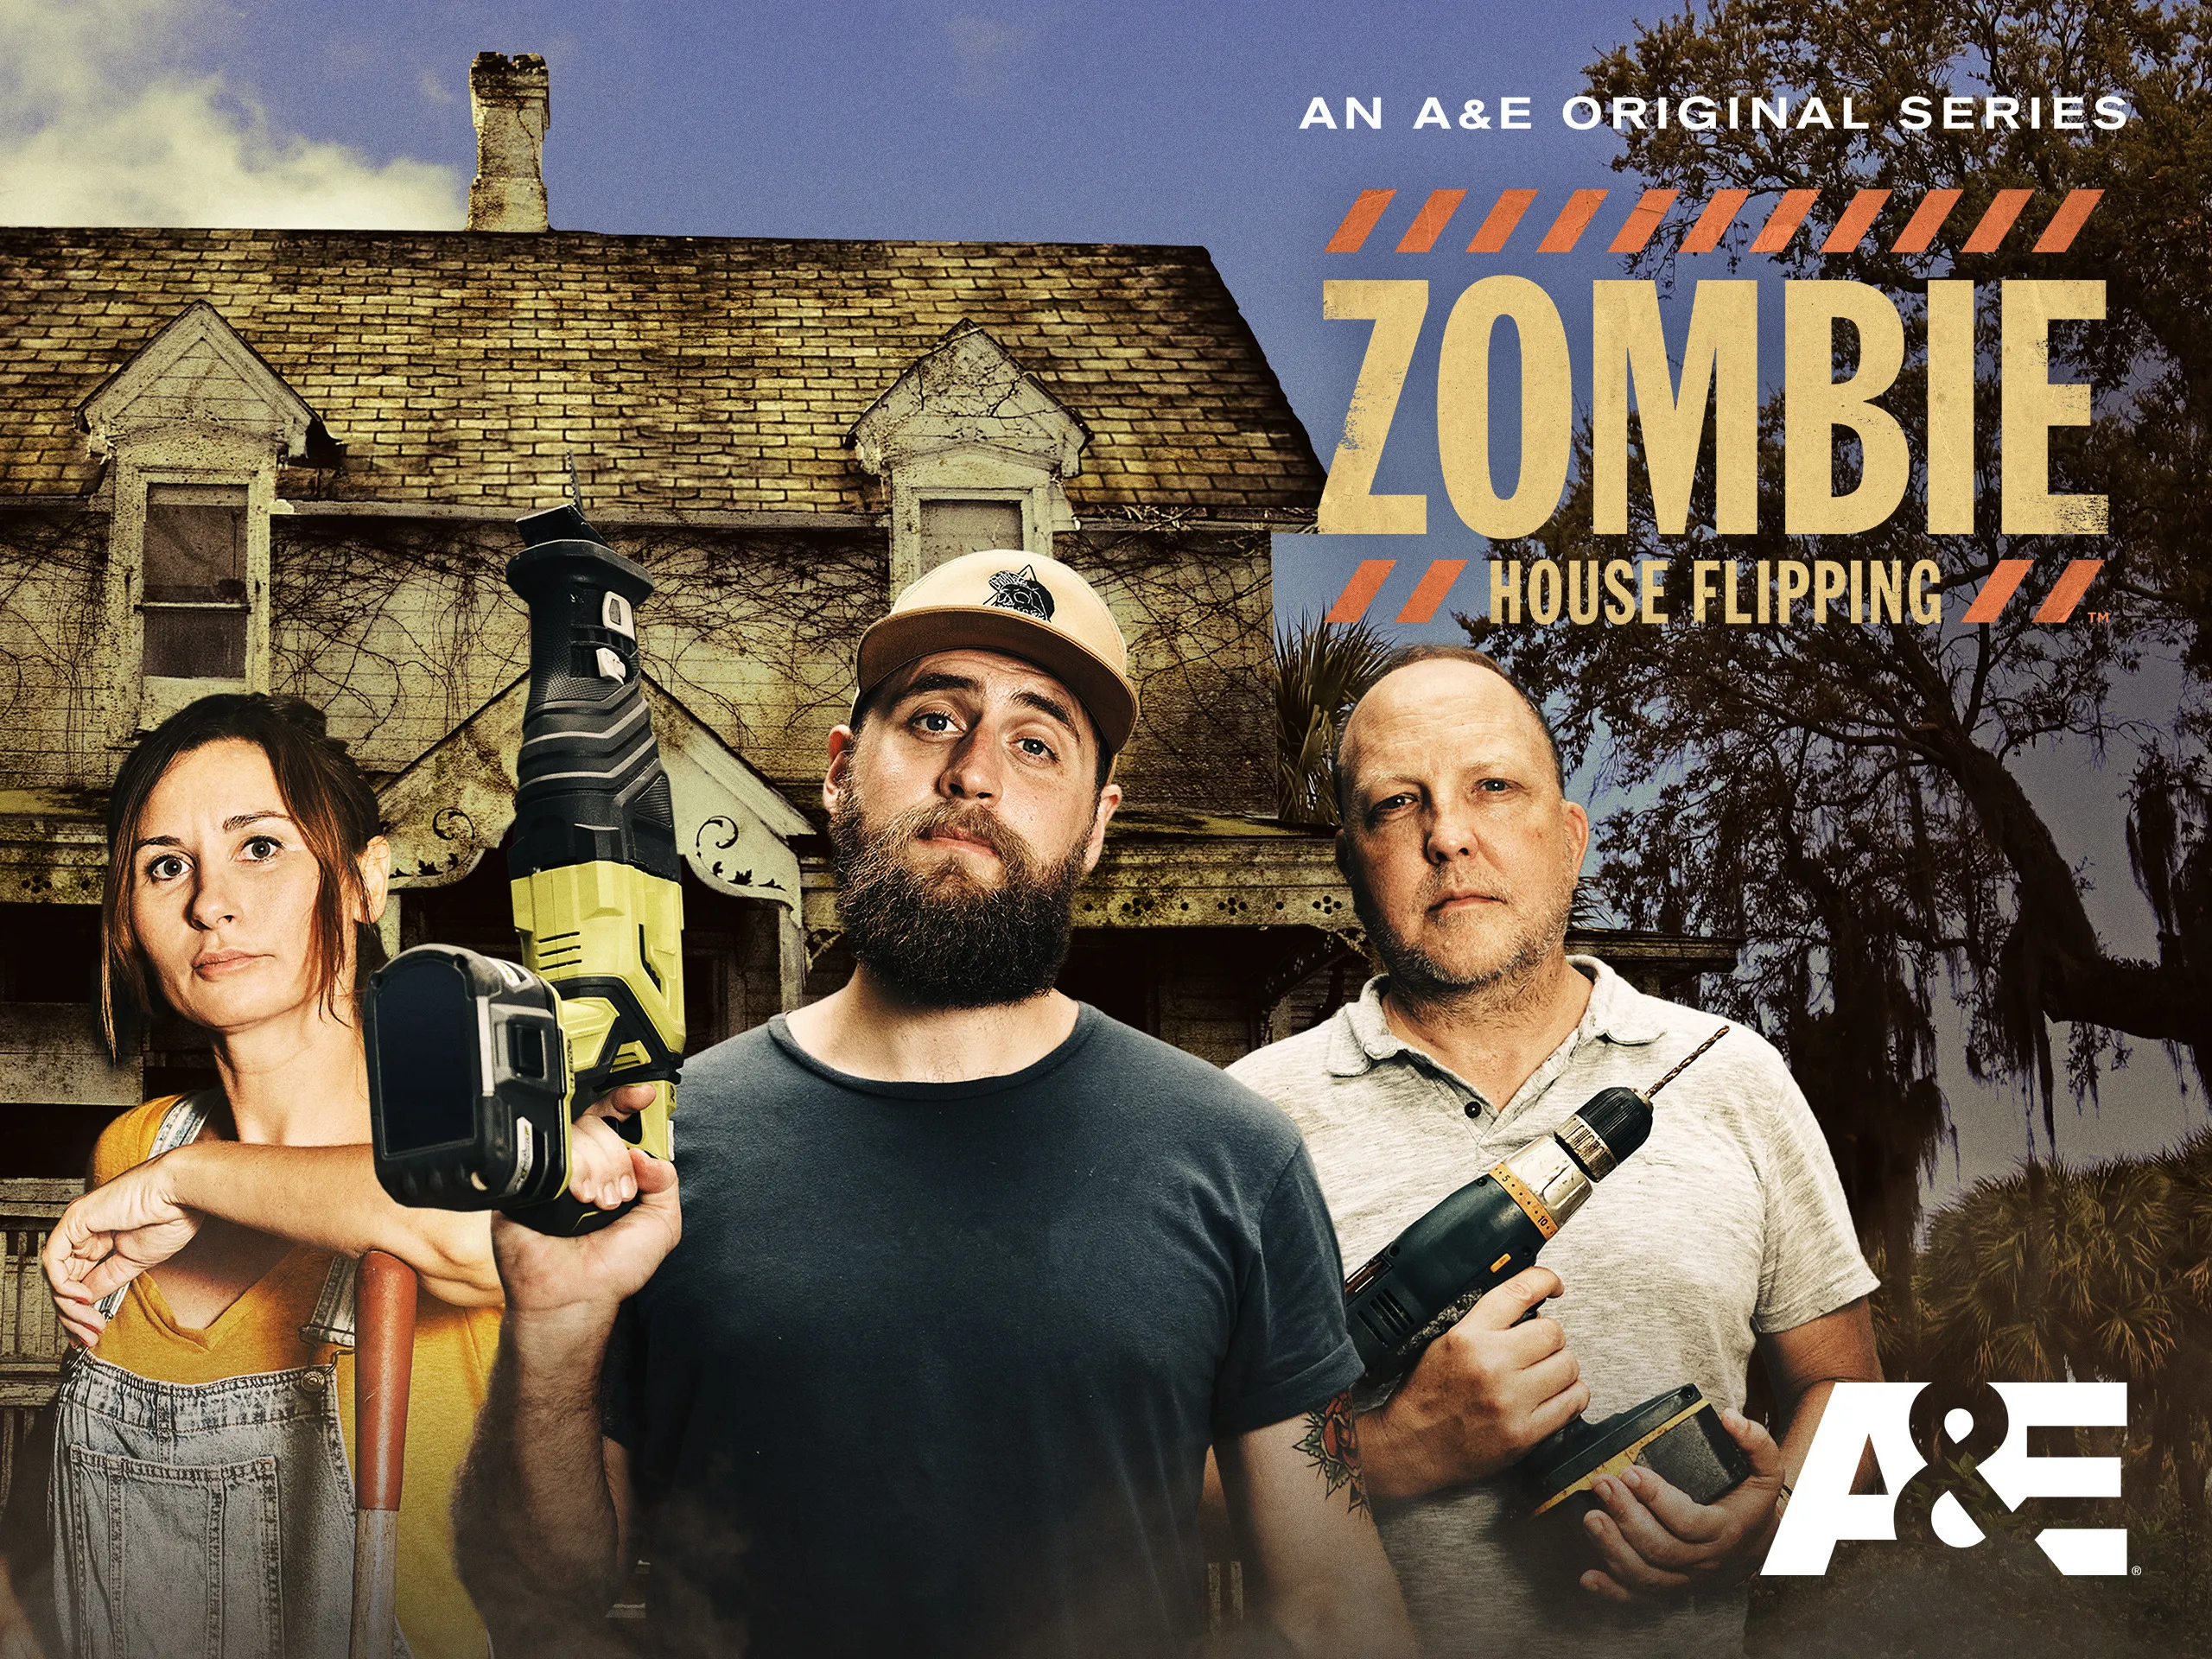 Zombie House Flipping Cast